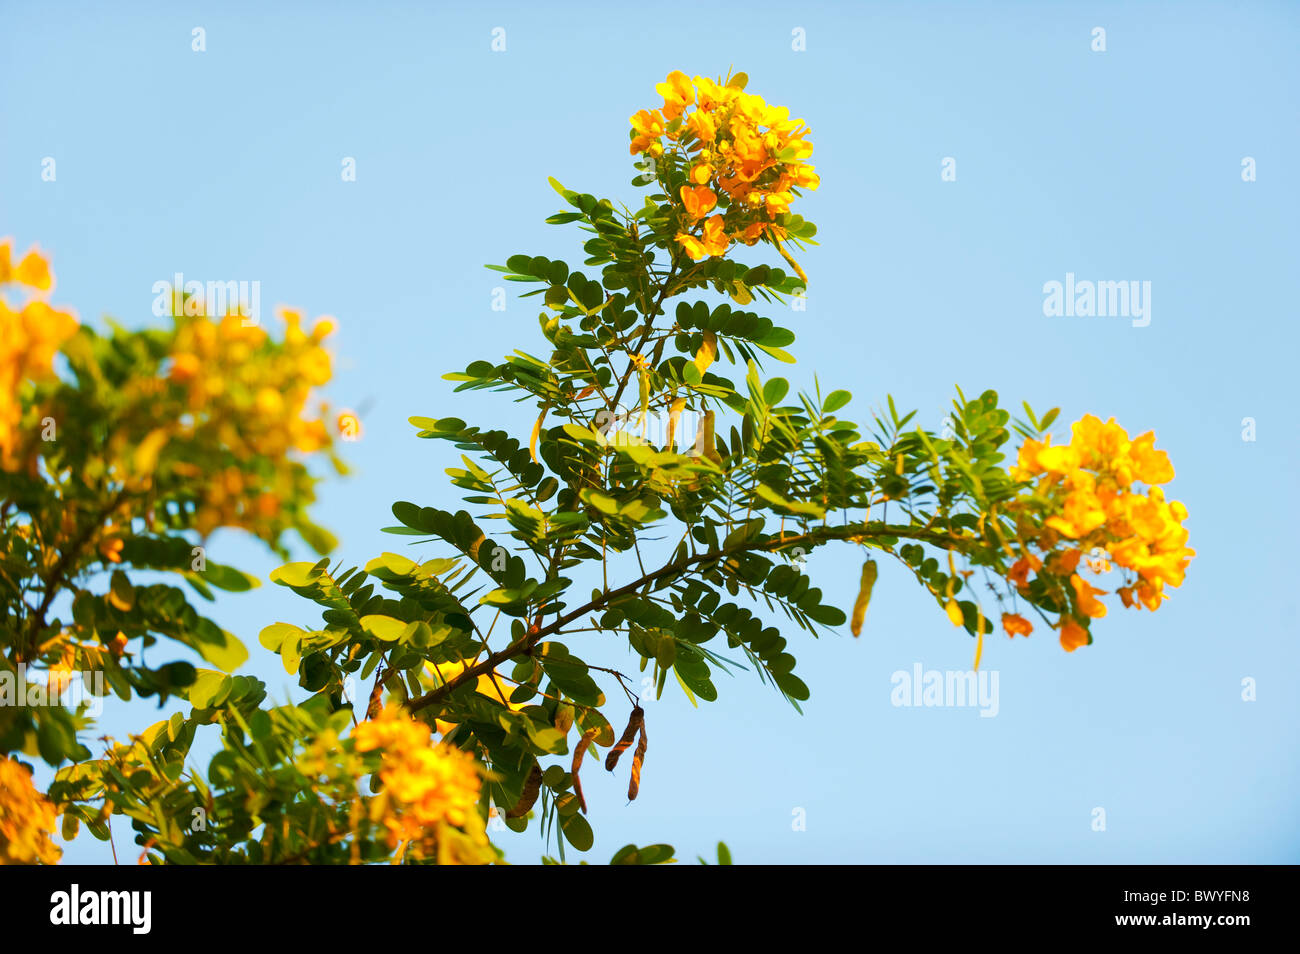 Tamarind Flowers High Resolution Stock Photography And Images Alamy